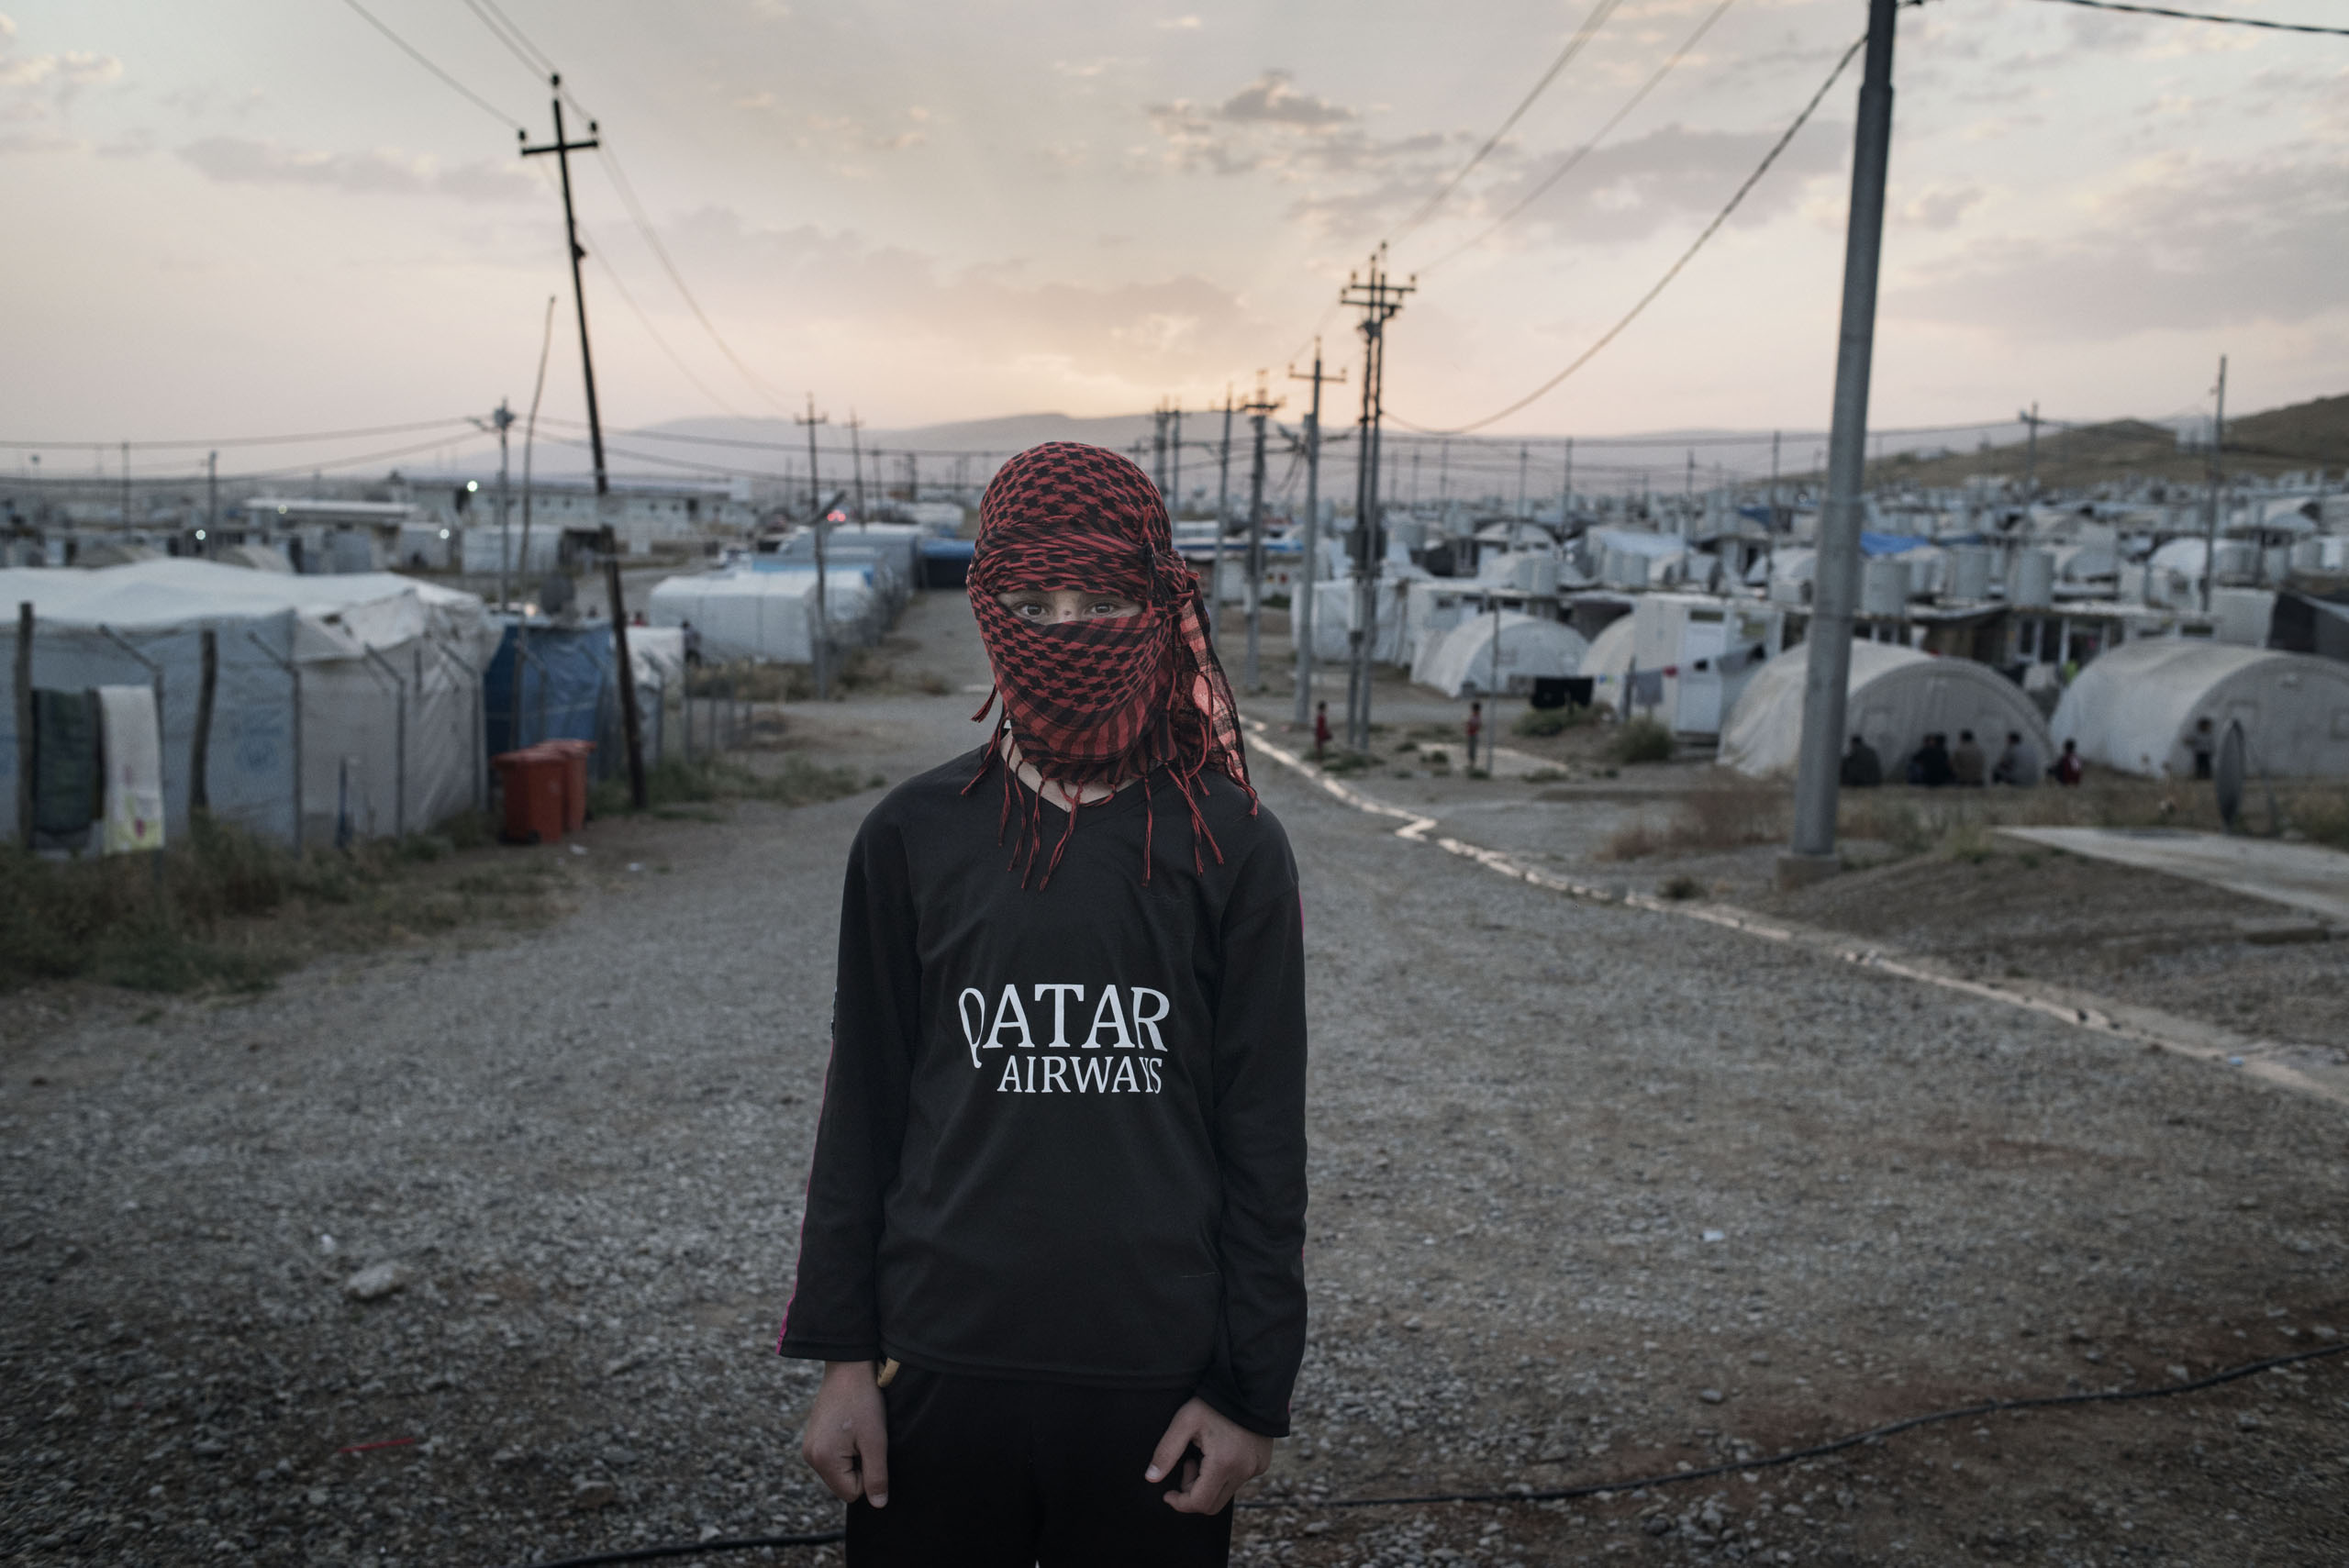 A 16-year old boy at a camp for displaced people outside the city of Dohuk in Iraq's autonomous Kurdish region, May 19, 2016. The teenager was taken captive by ISIS fighters in the summer of 2014 and underwent months of forced military training before escaping in 2015.